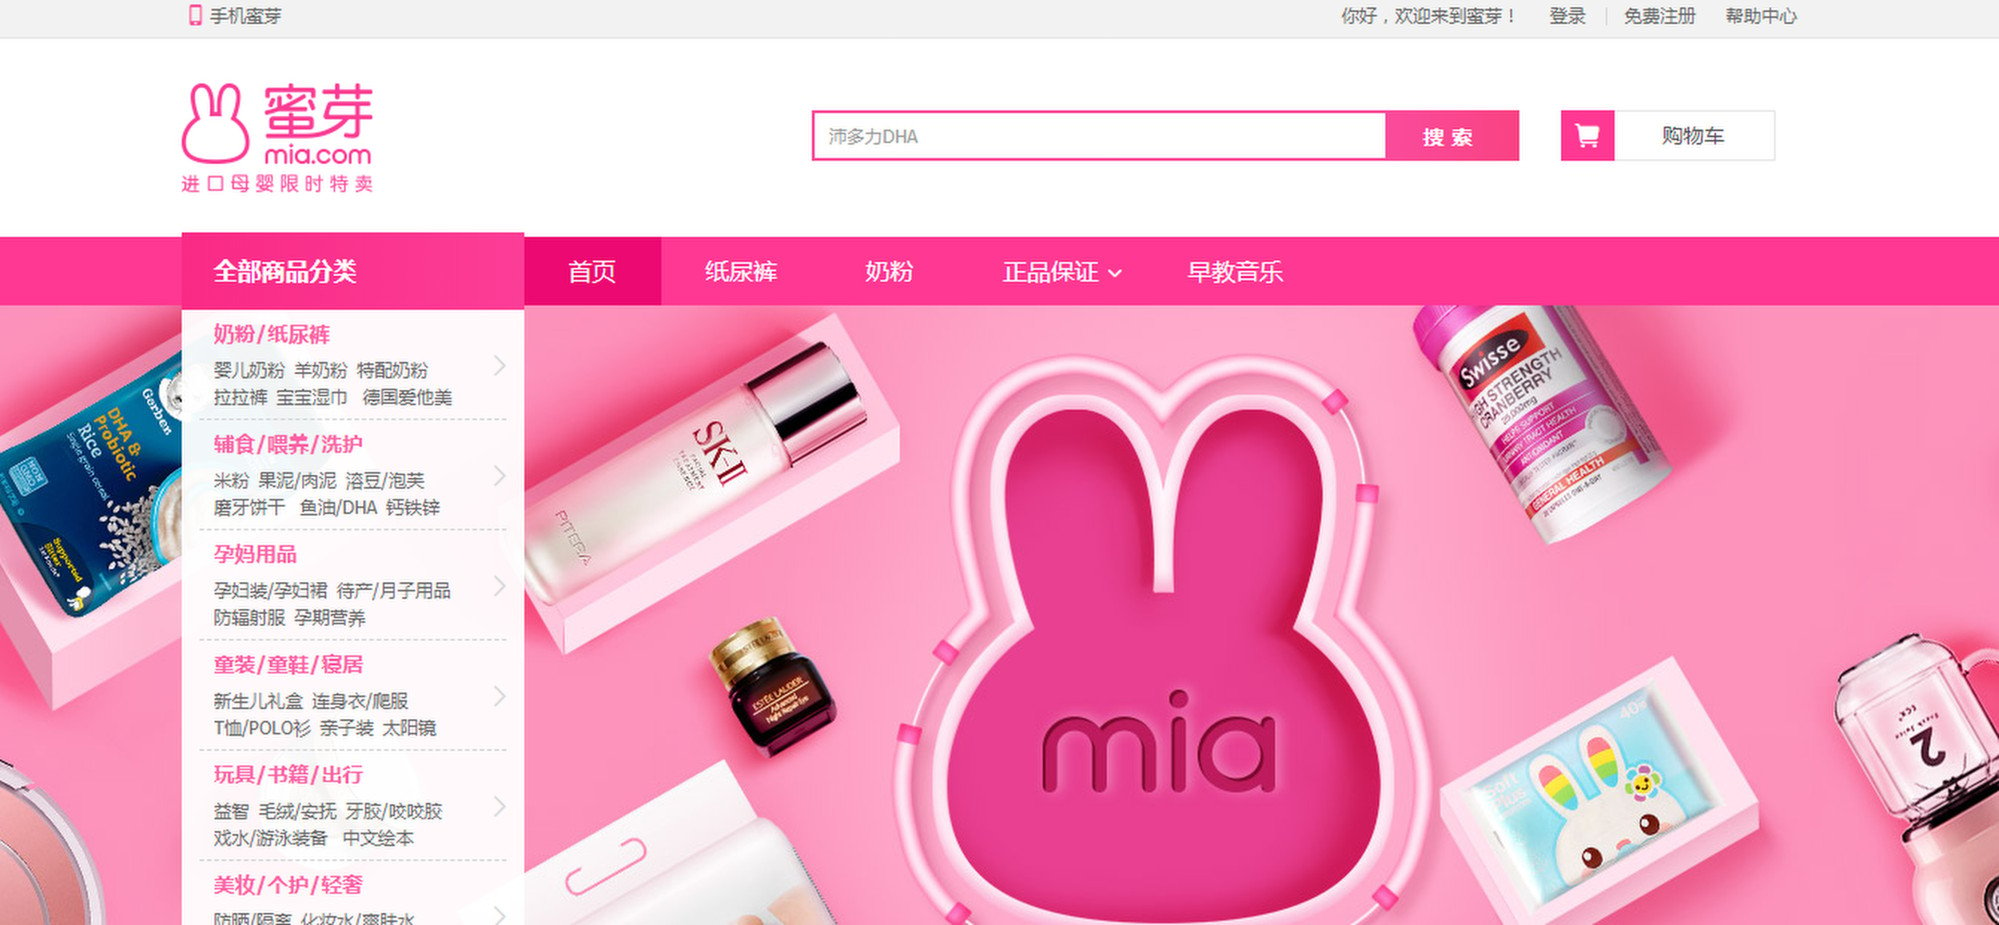 The landing page of Mia.com, operator of a popular Chinese online shopping emporium for baby-and-mom merchandise. Photo: Handout